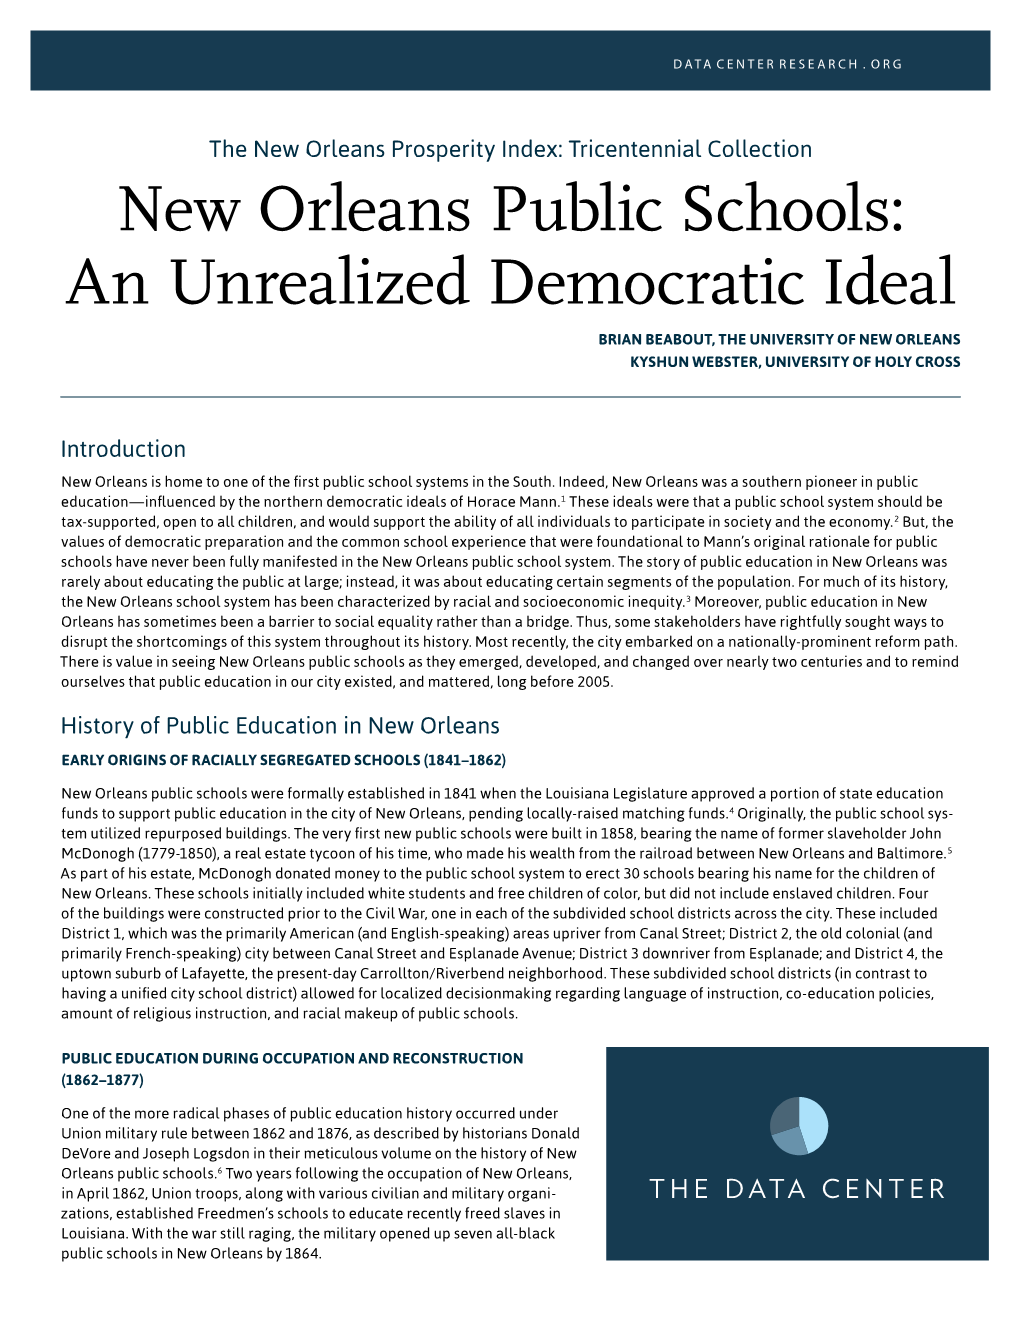 New Orleans Public Schools: an Unrealized Democratic Ideal BRIAN BEABOUT, the UNIVERSITY of NEW ORLEANS KYSHUN WEBSTER, UNIVERSITY of HOLY CROSS